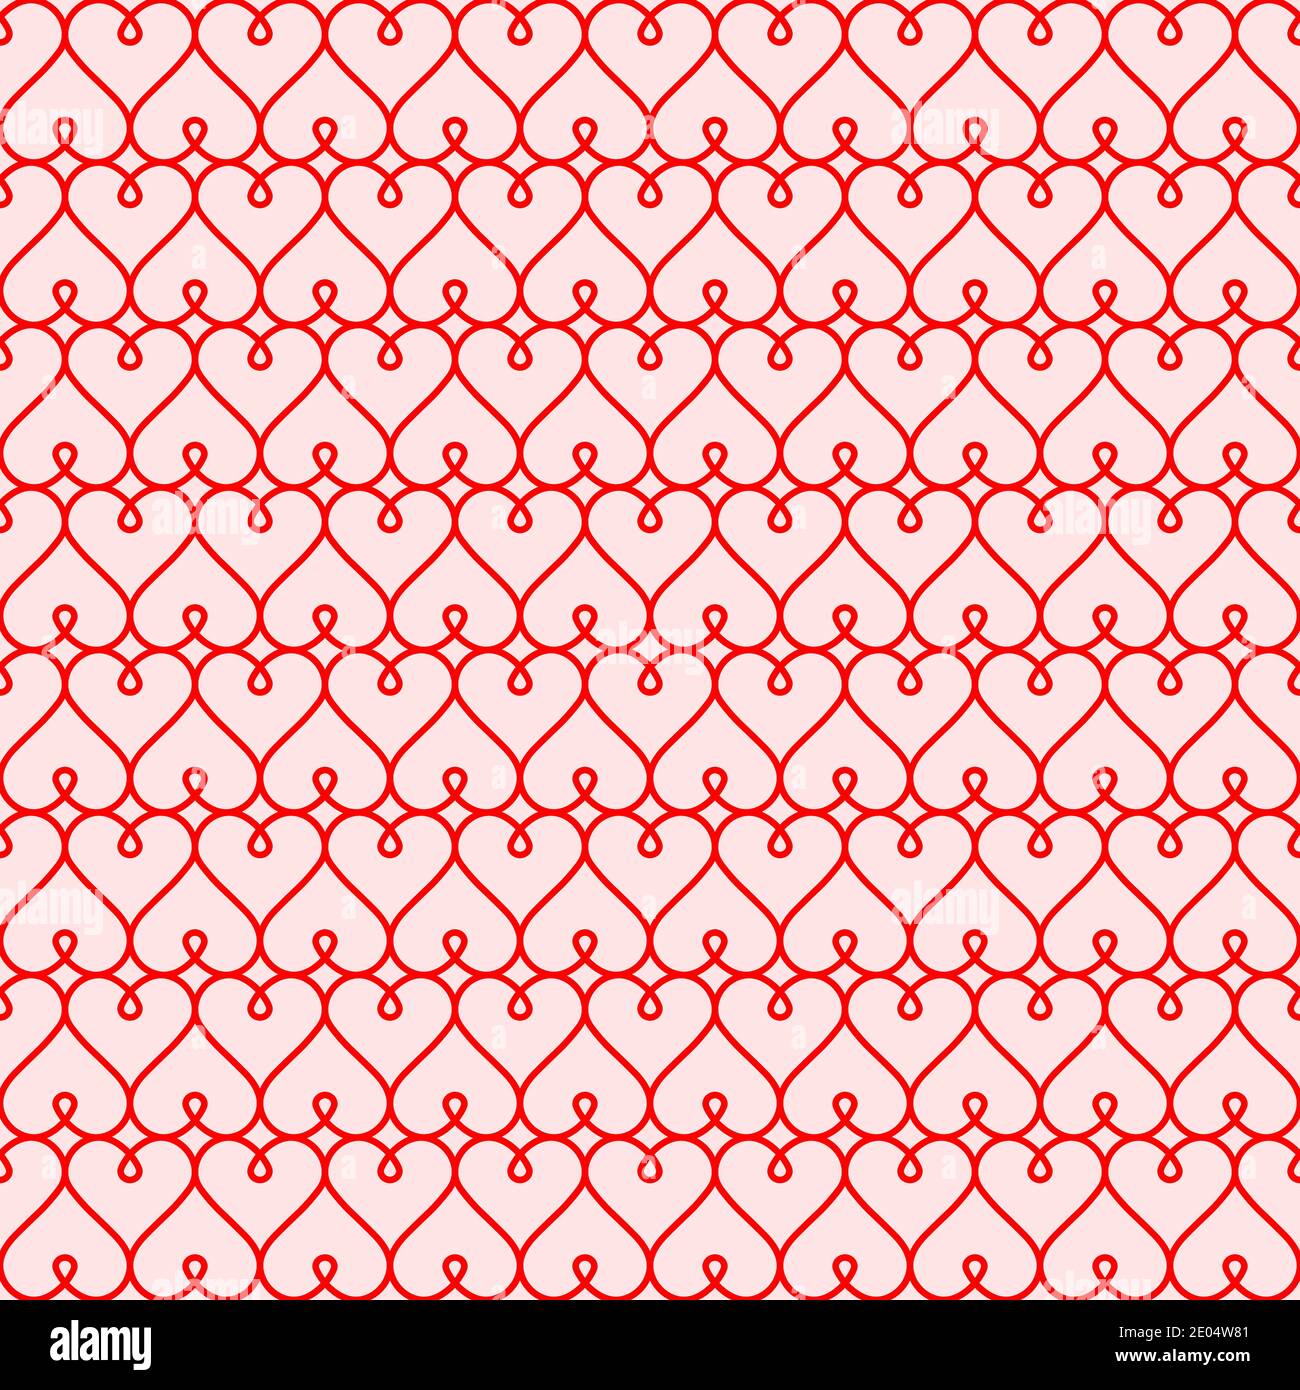 red hearts seamless background vector background for Valentines day calligraphic hearts for Declaration of love at first sight Stock Vector